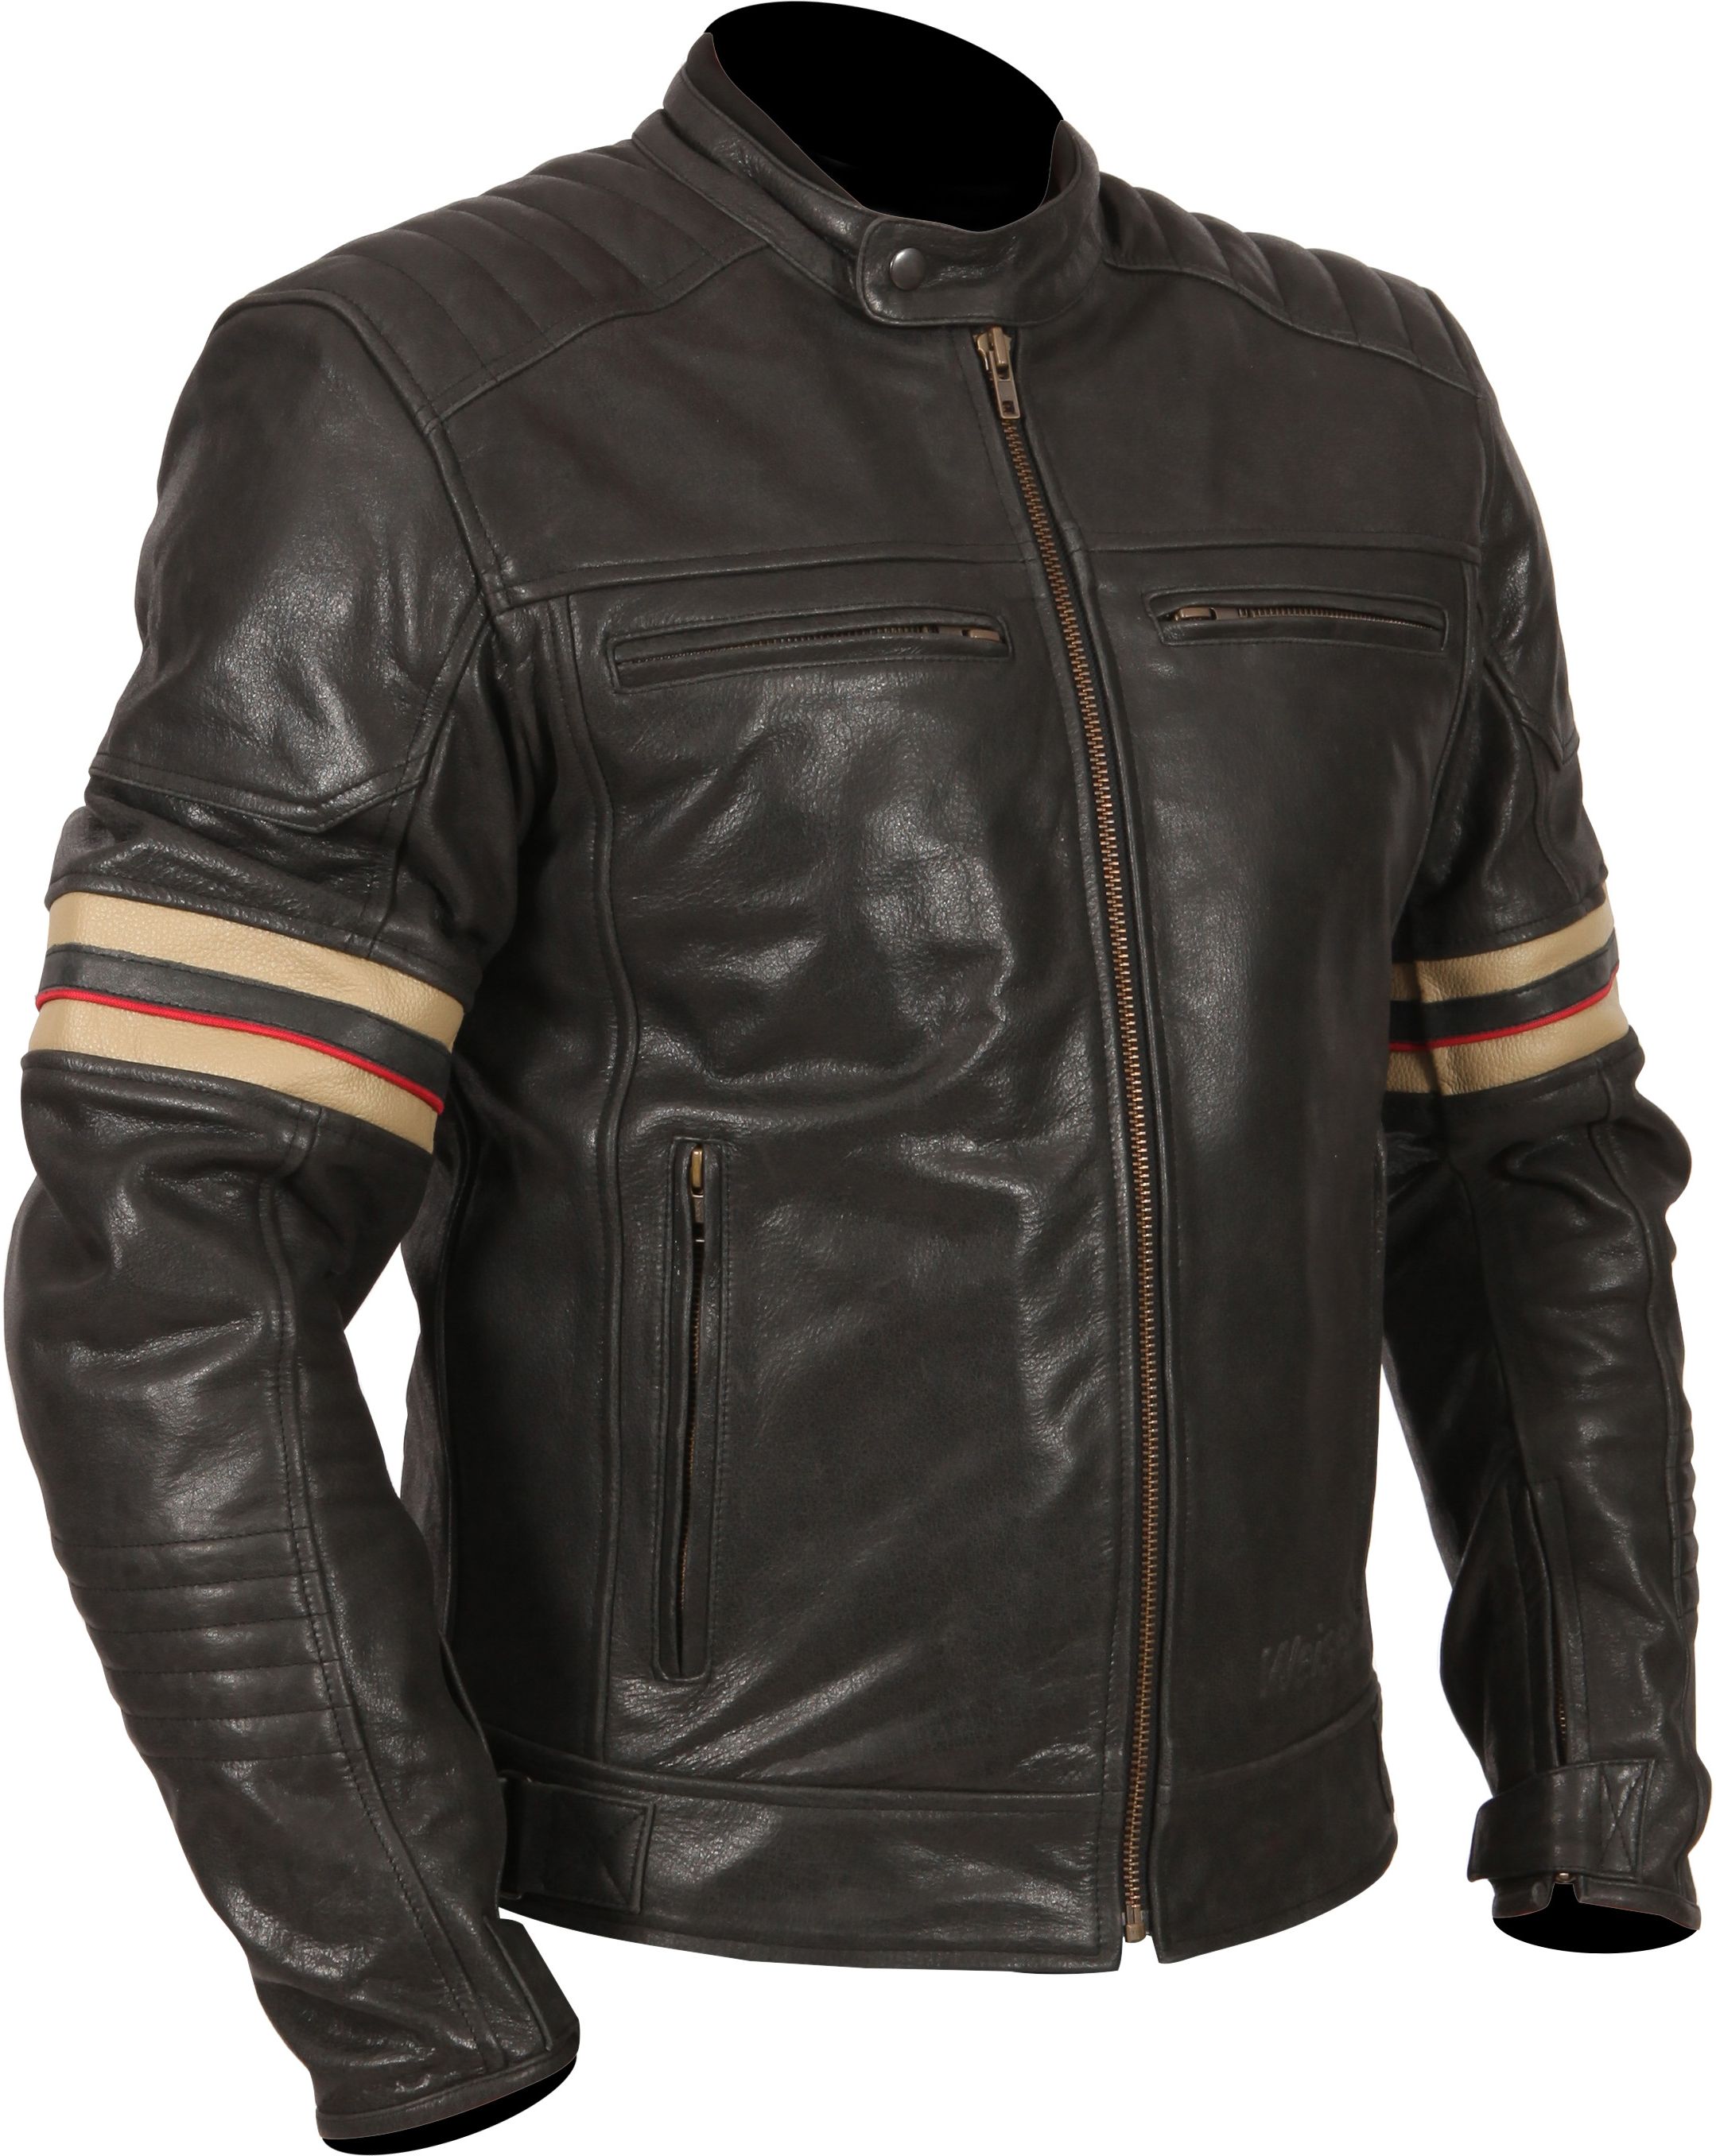 Weise Classic Leather Jacket | Back to the future with Weise